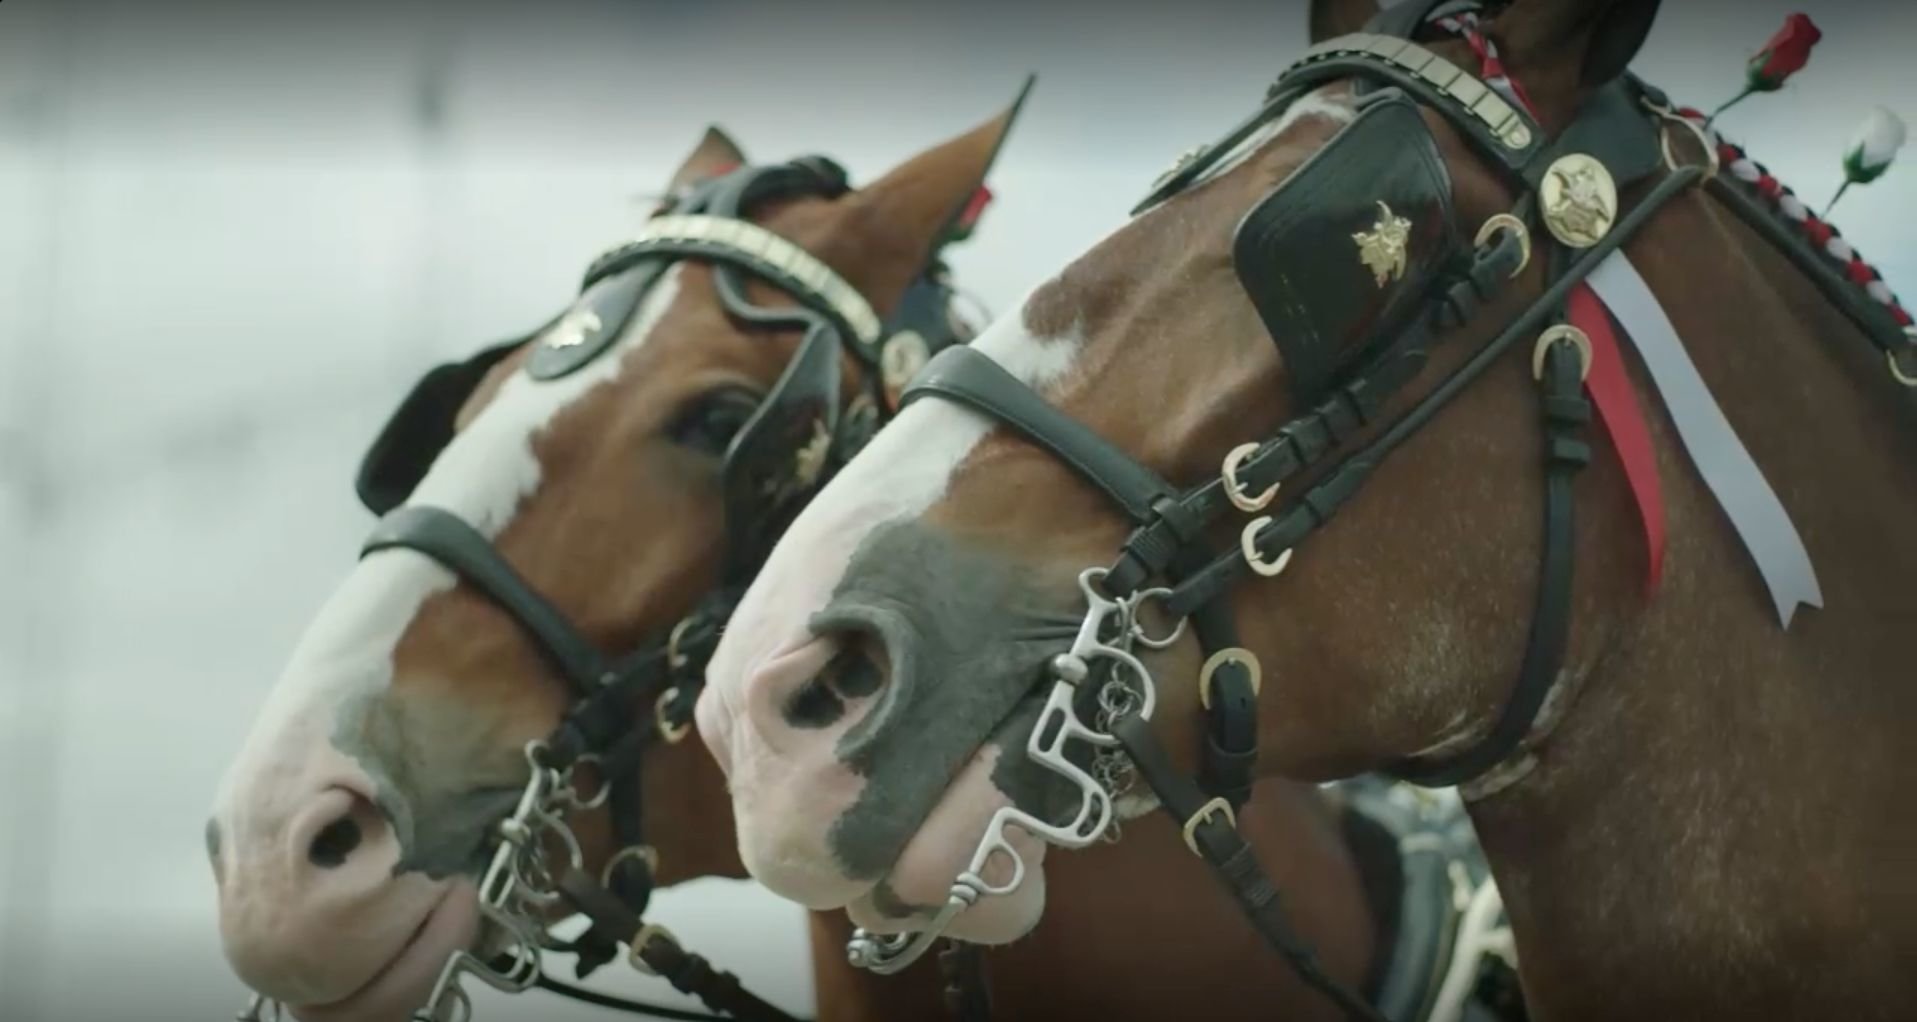 Anheuser-Busch Debuts New Ad Celebrating the People Behind the World-Famous Budweiser Clydesdales